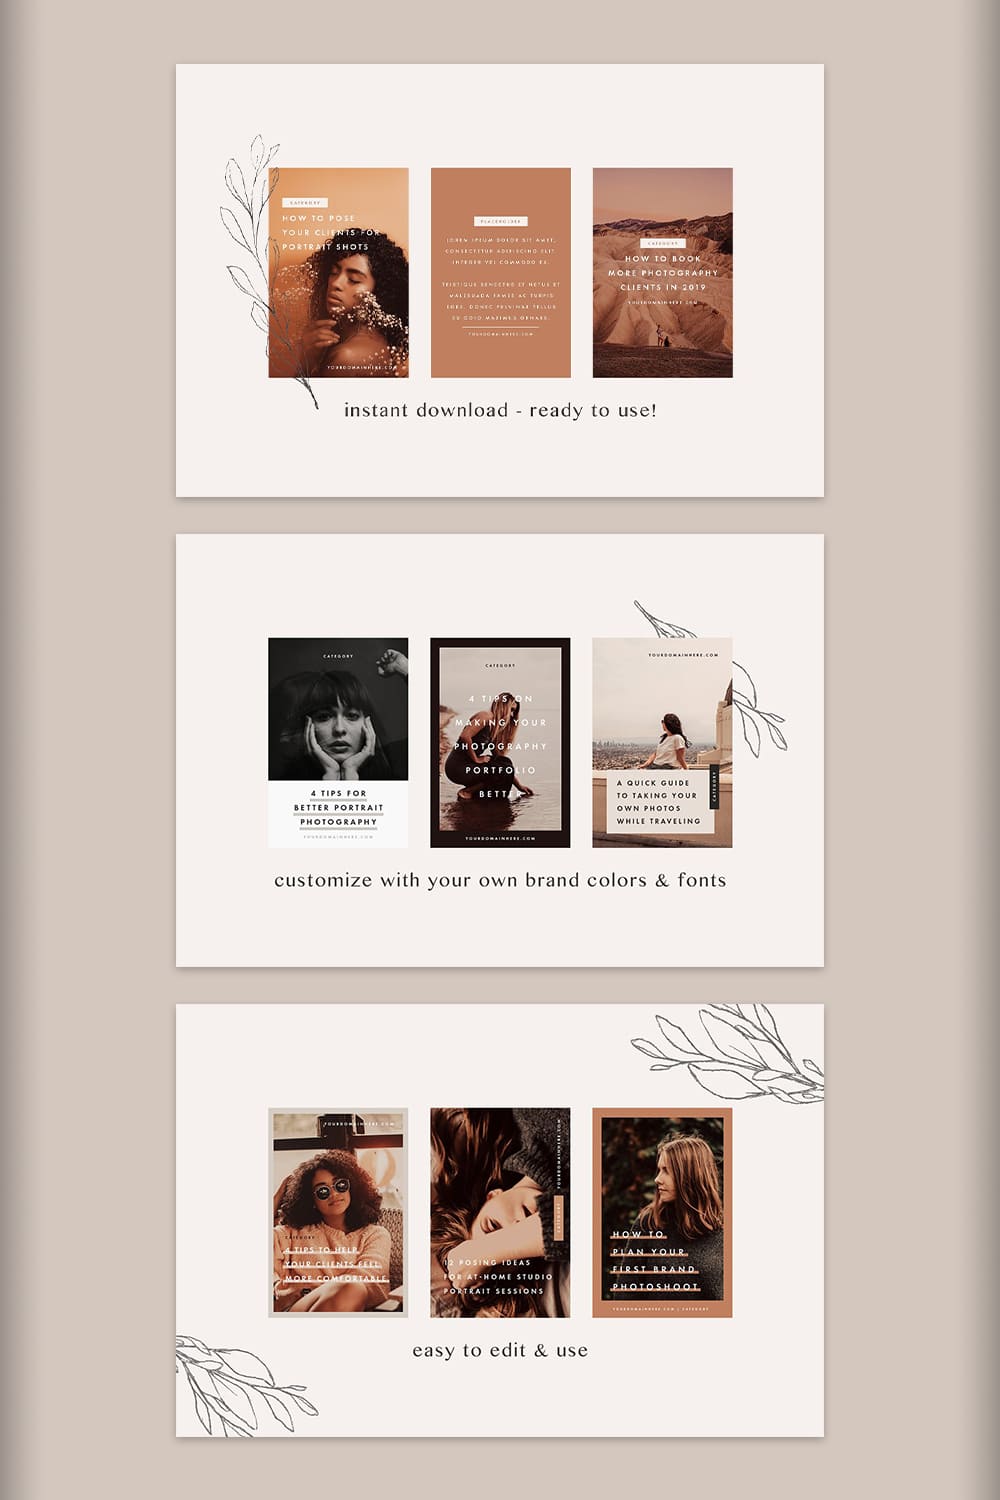 Pinterest Templates - "Customize With Your Own Brand Colors & Fonts".